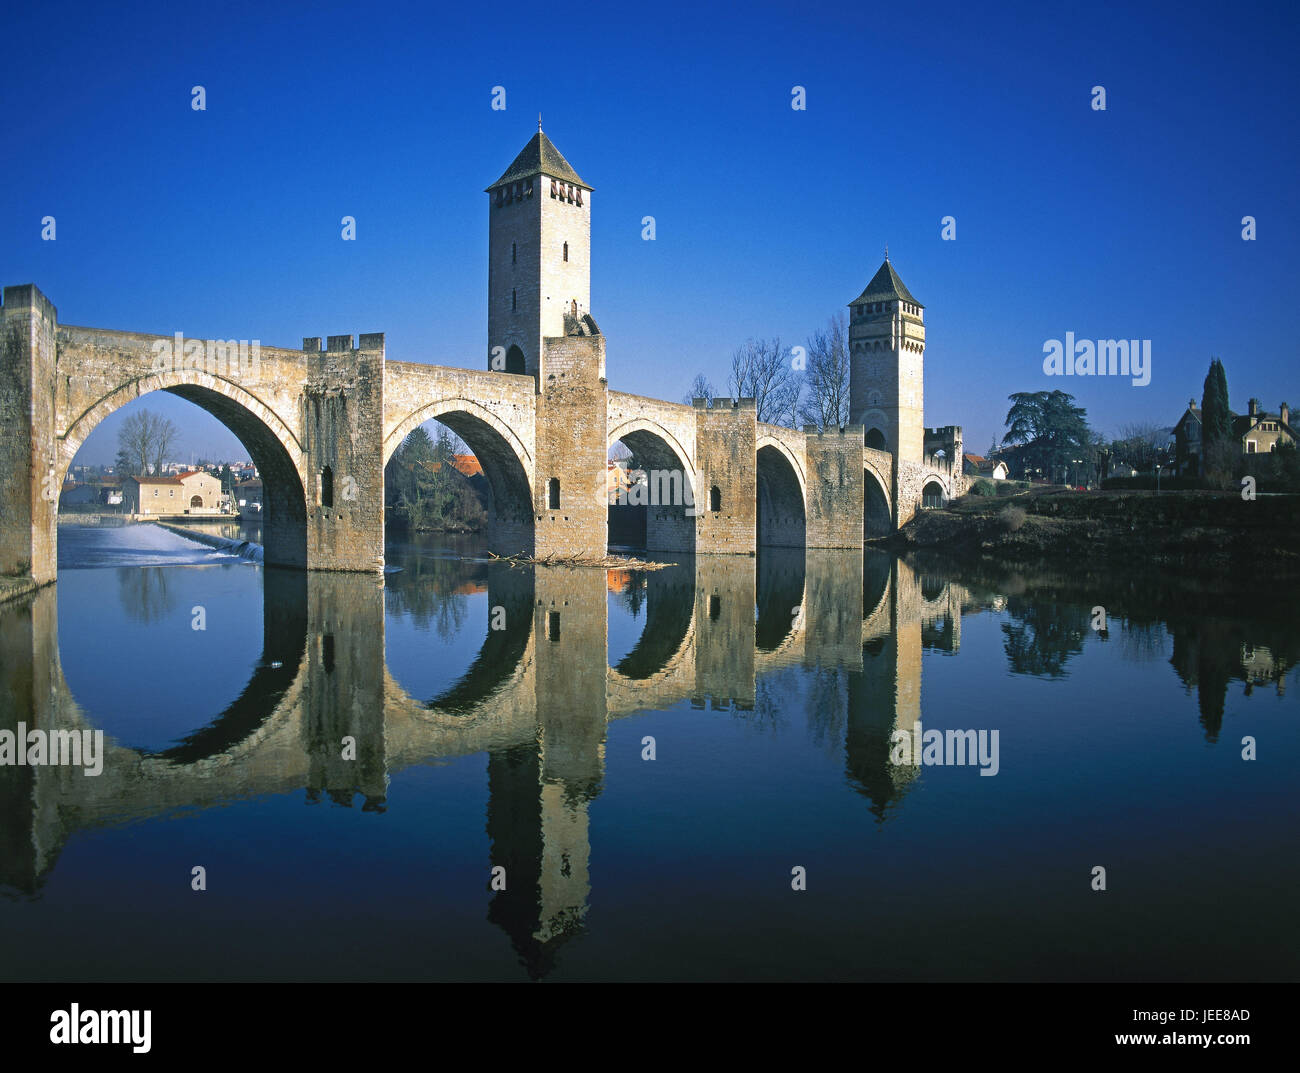 France, Cahors, flux perpendicular, Pont Valentre, mirroring, water surface, Europe, Südwestfrankreich, town, bridge, stone bridge, crossing, bridge towers, structure historically, architecture, place of interest, summer, sky, blue, cloudless, Stock Photo